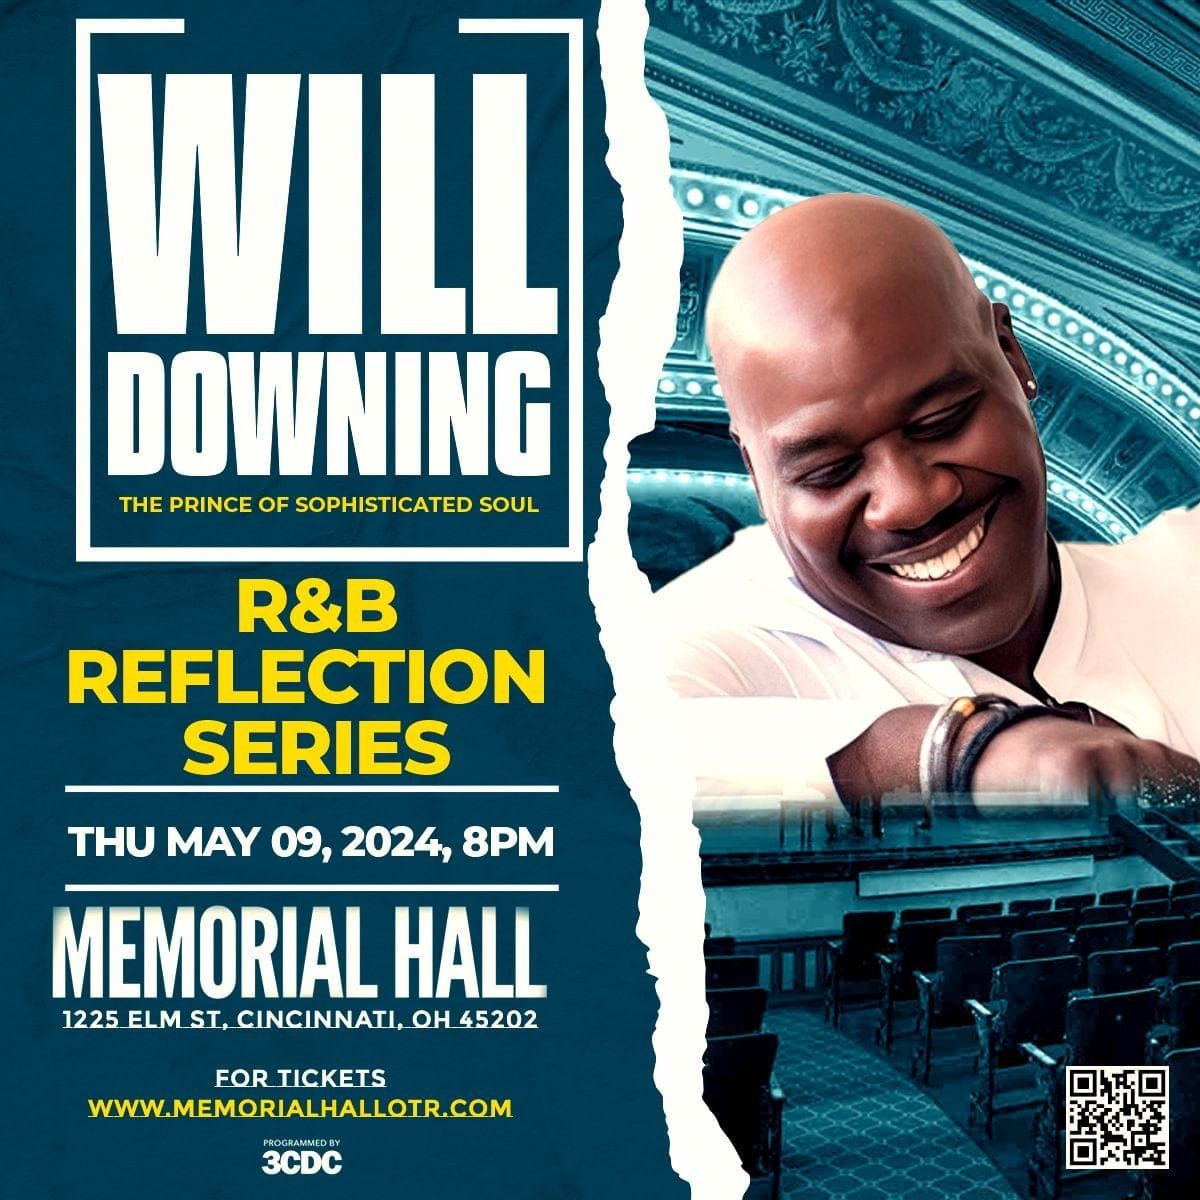 WILL DOWNING LIVE AT MEMORIAL HALL